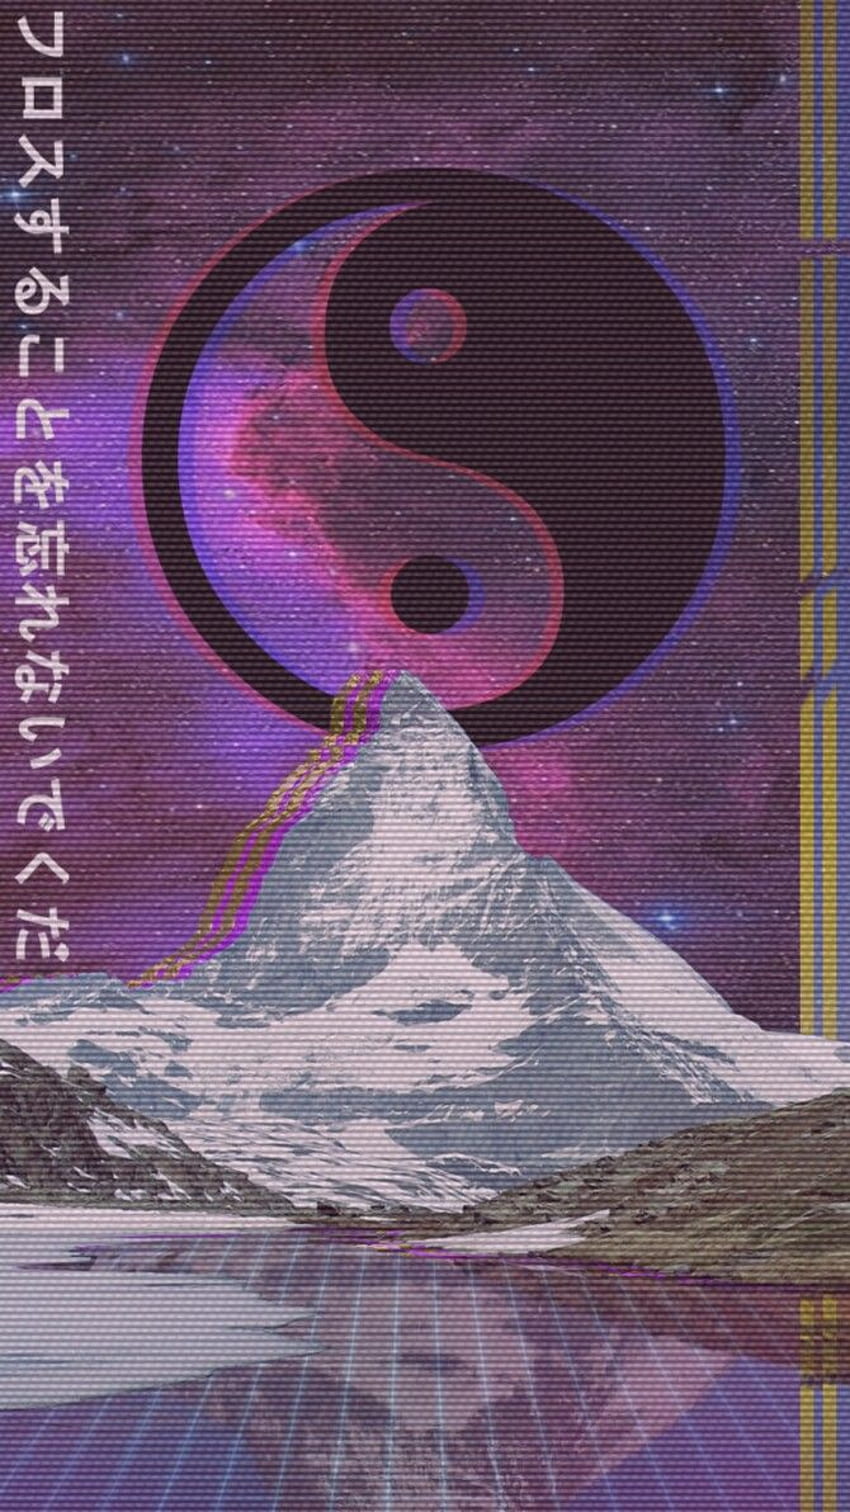 A mountain with the yin and sigma symbol - Vaporwave